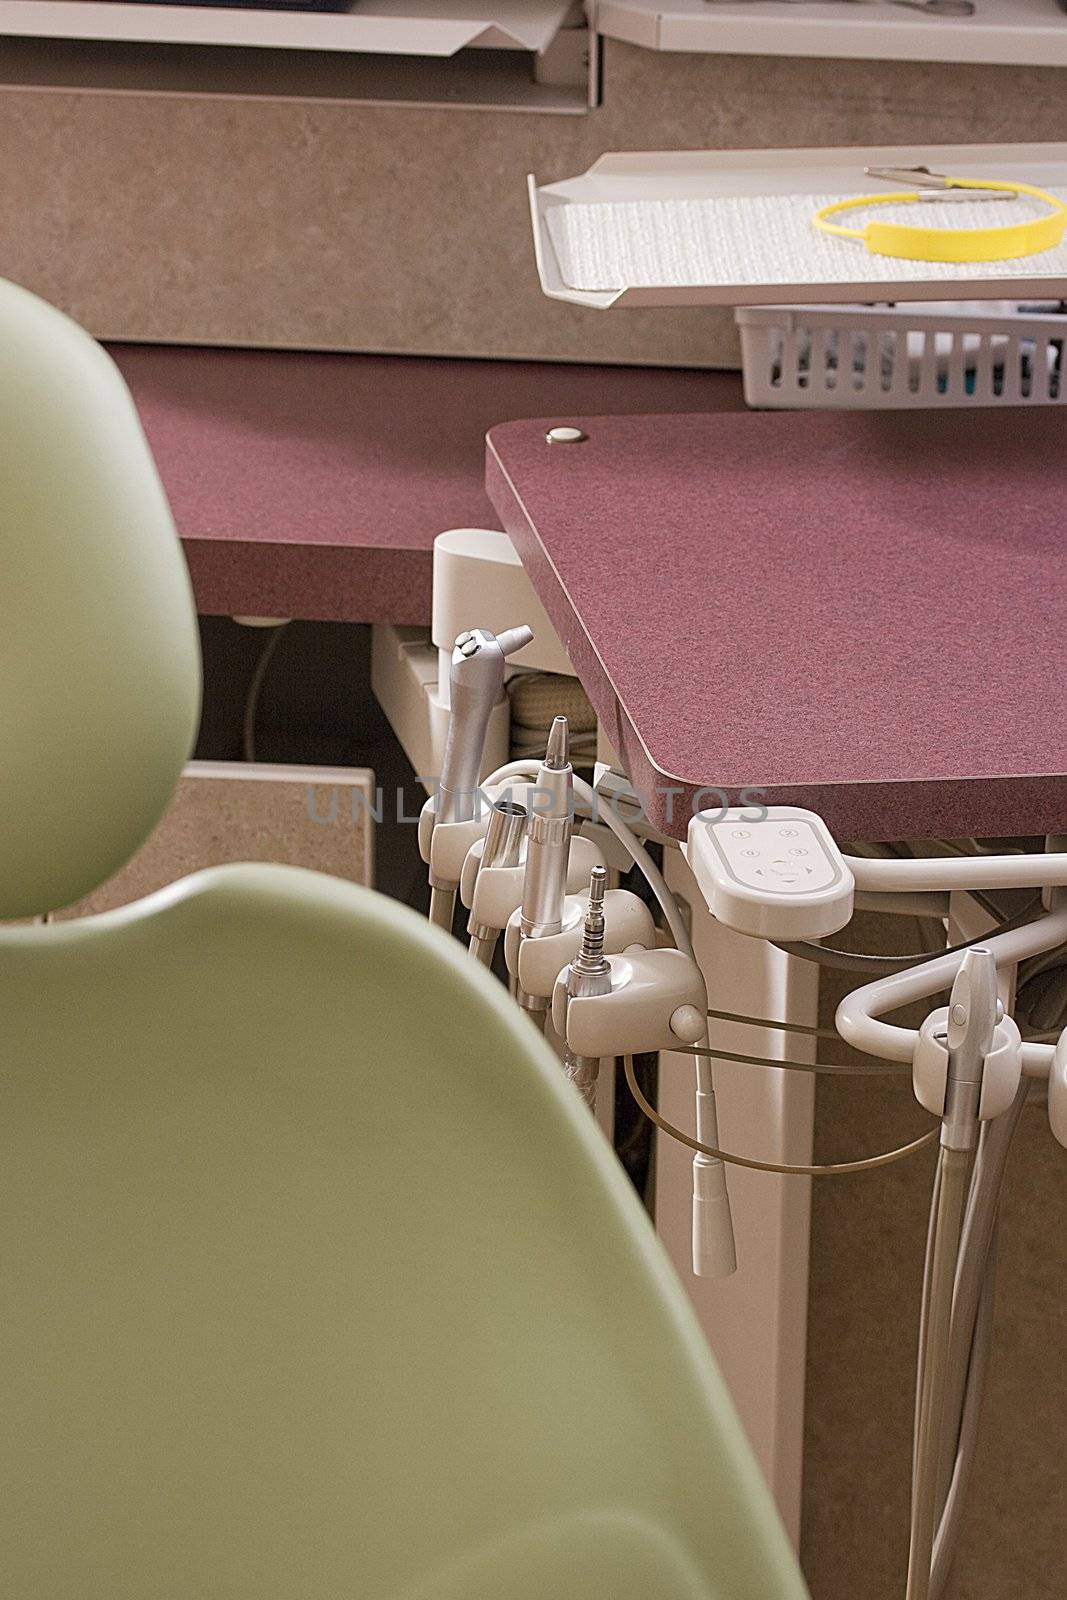 Dental counter and equipment in a dental clinic.